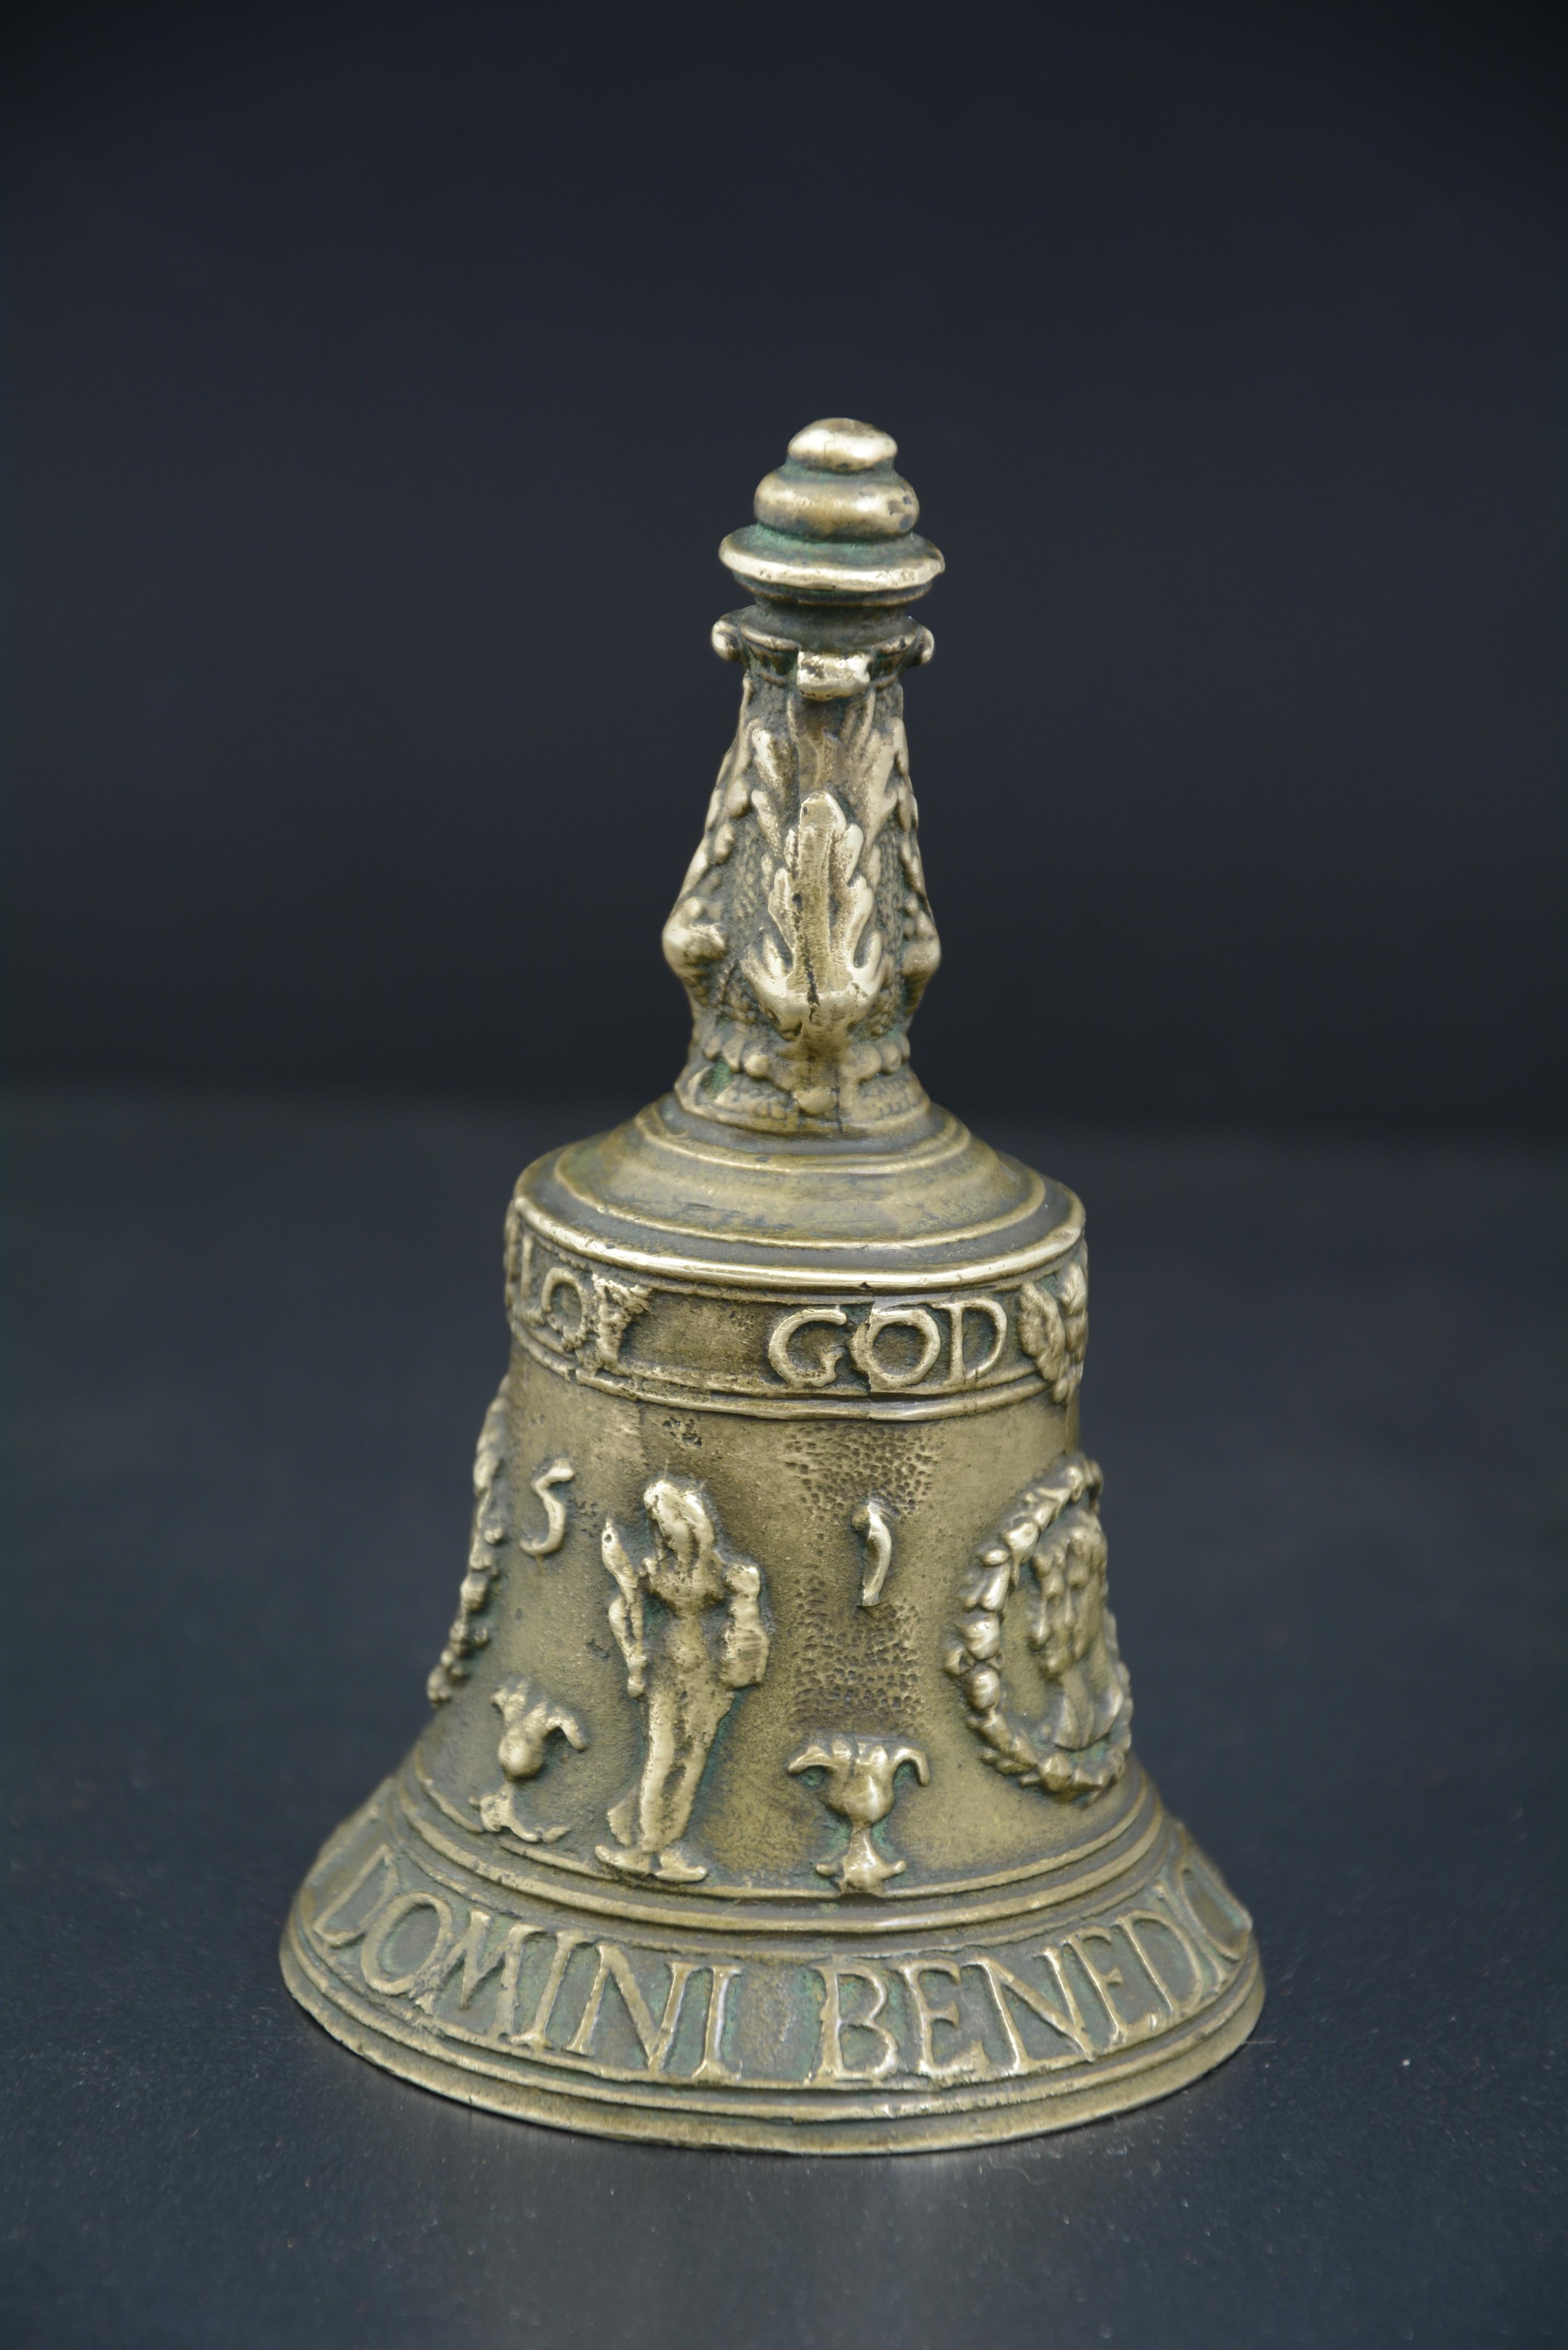 Renaissance bronze bell, 1555.
Dated.
Stem decorated with vegetal elements, it presents the shoulders decorated with elegant lines, the middle presents profiles within vegetal garlands and two legends above and below in Latin.
The bells were